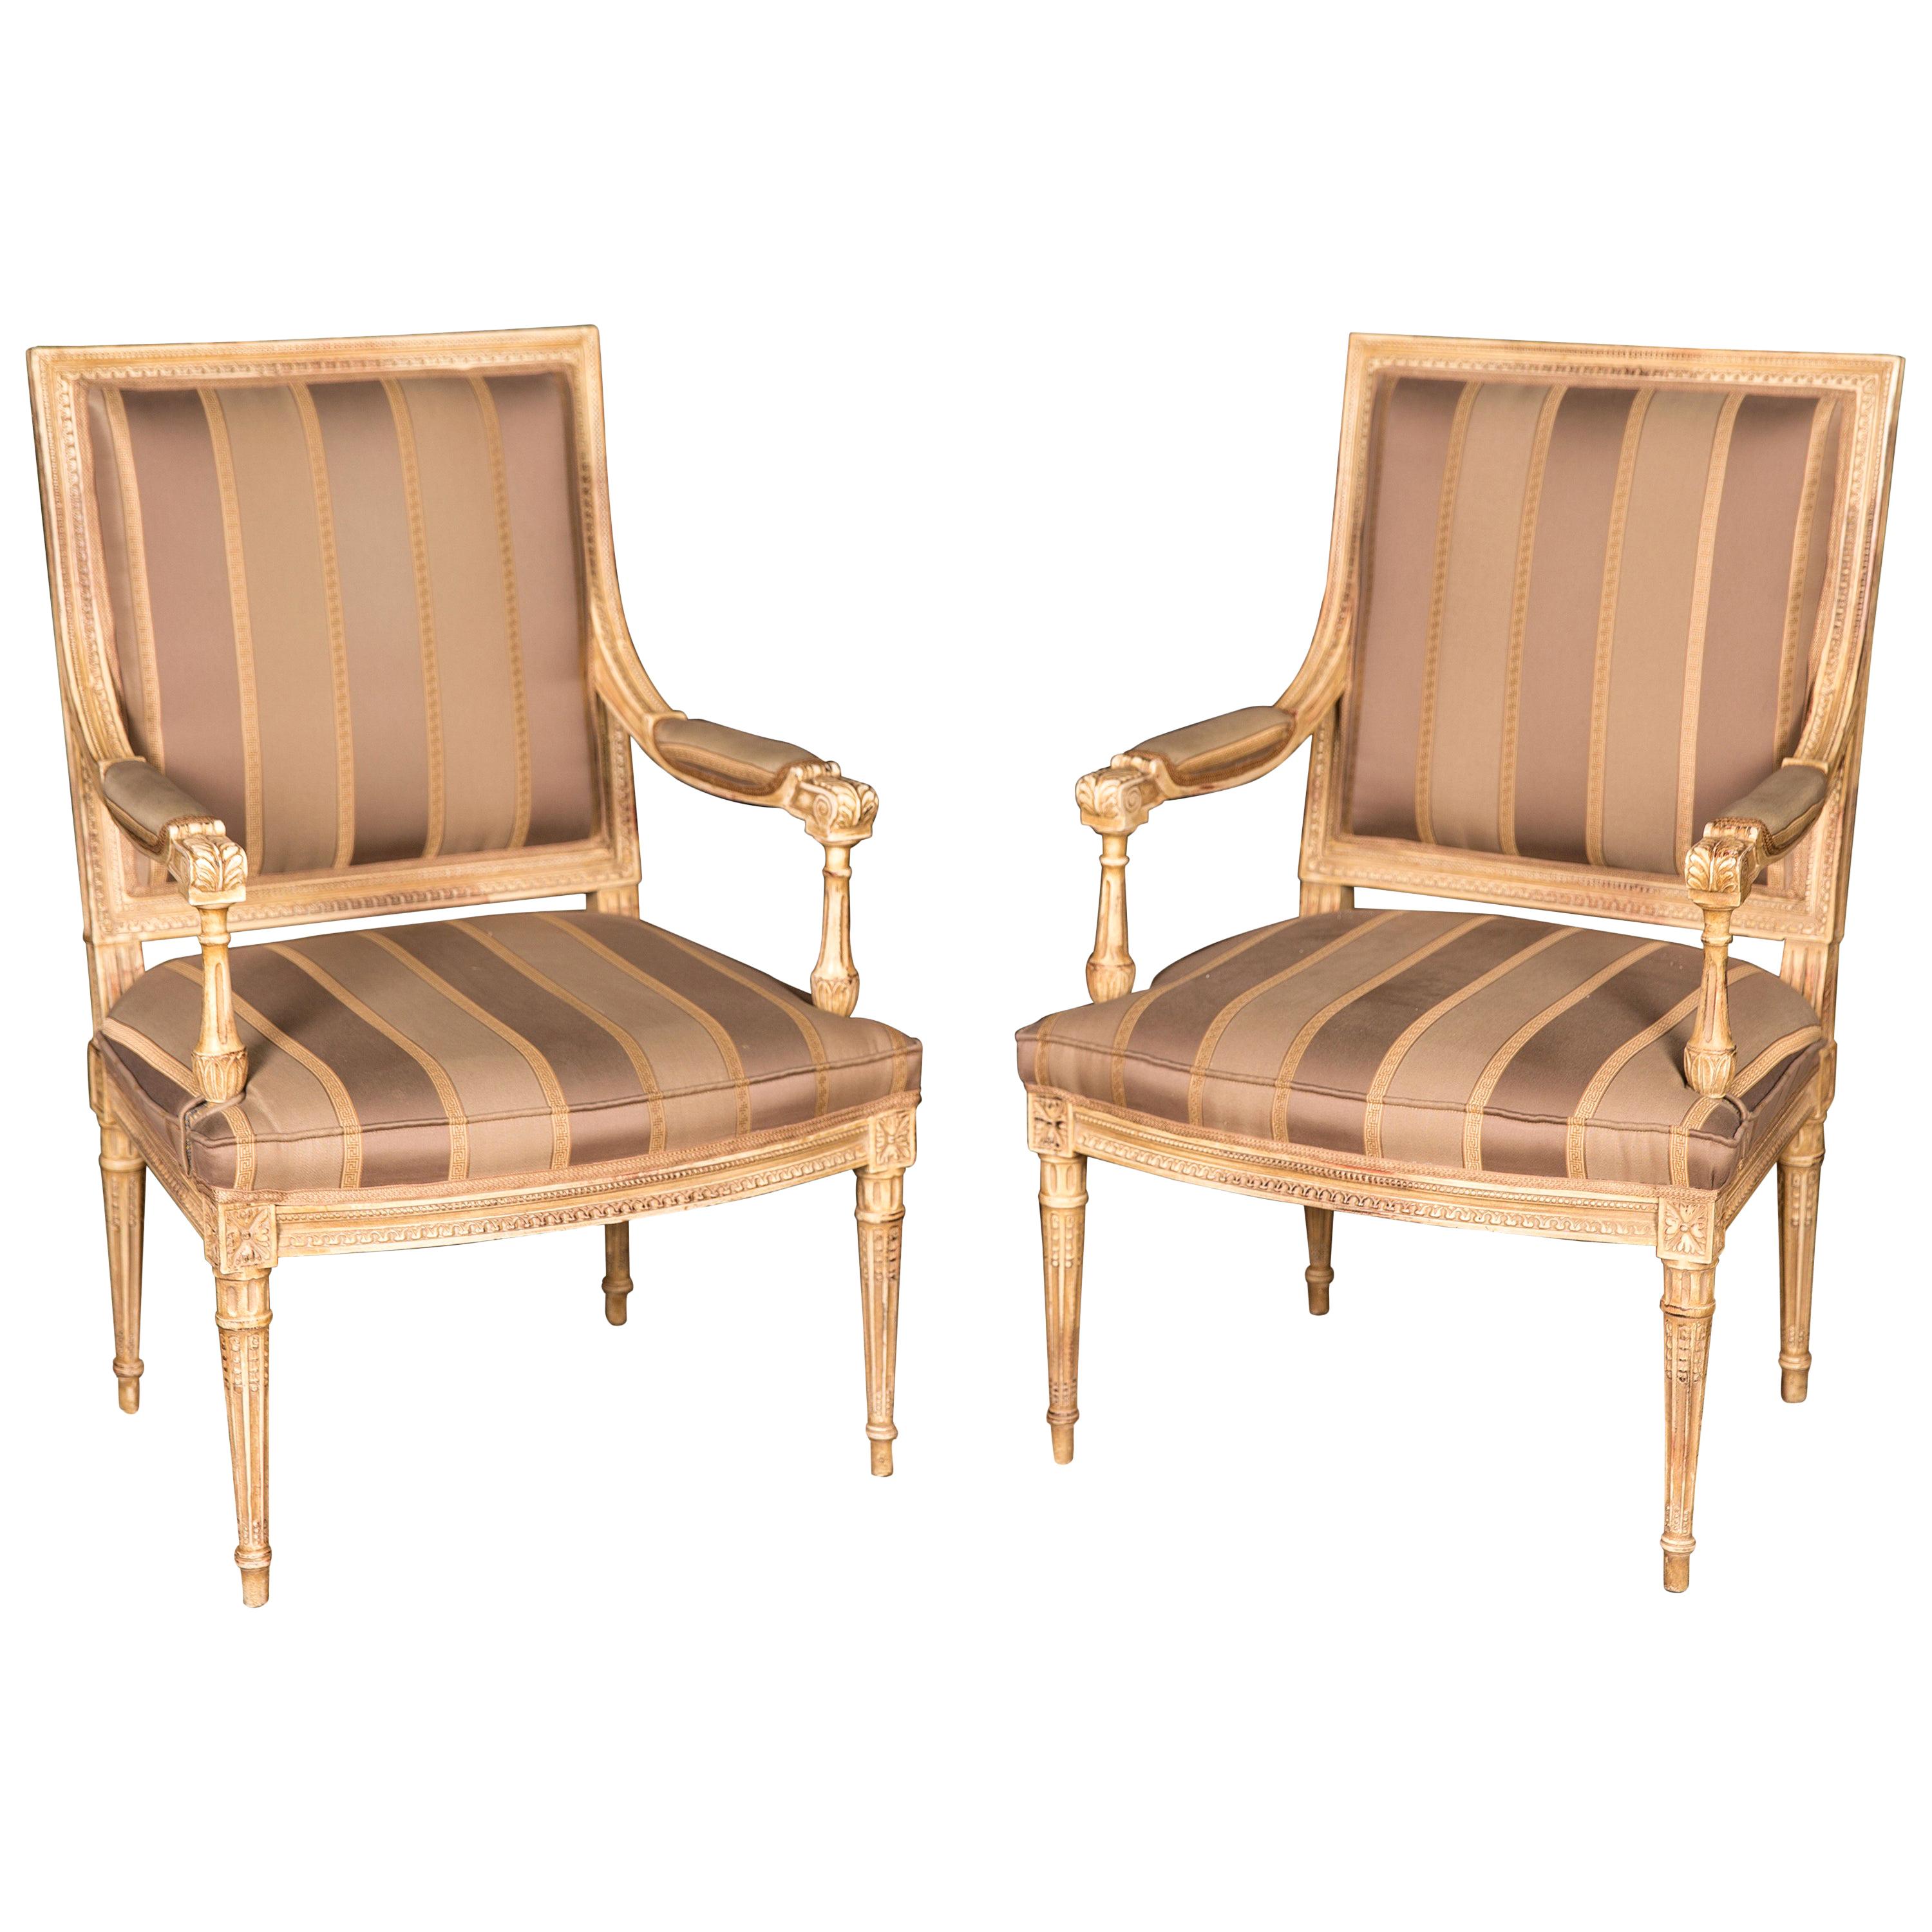 Two Elegant French Armchairs in the Louis Seize Style